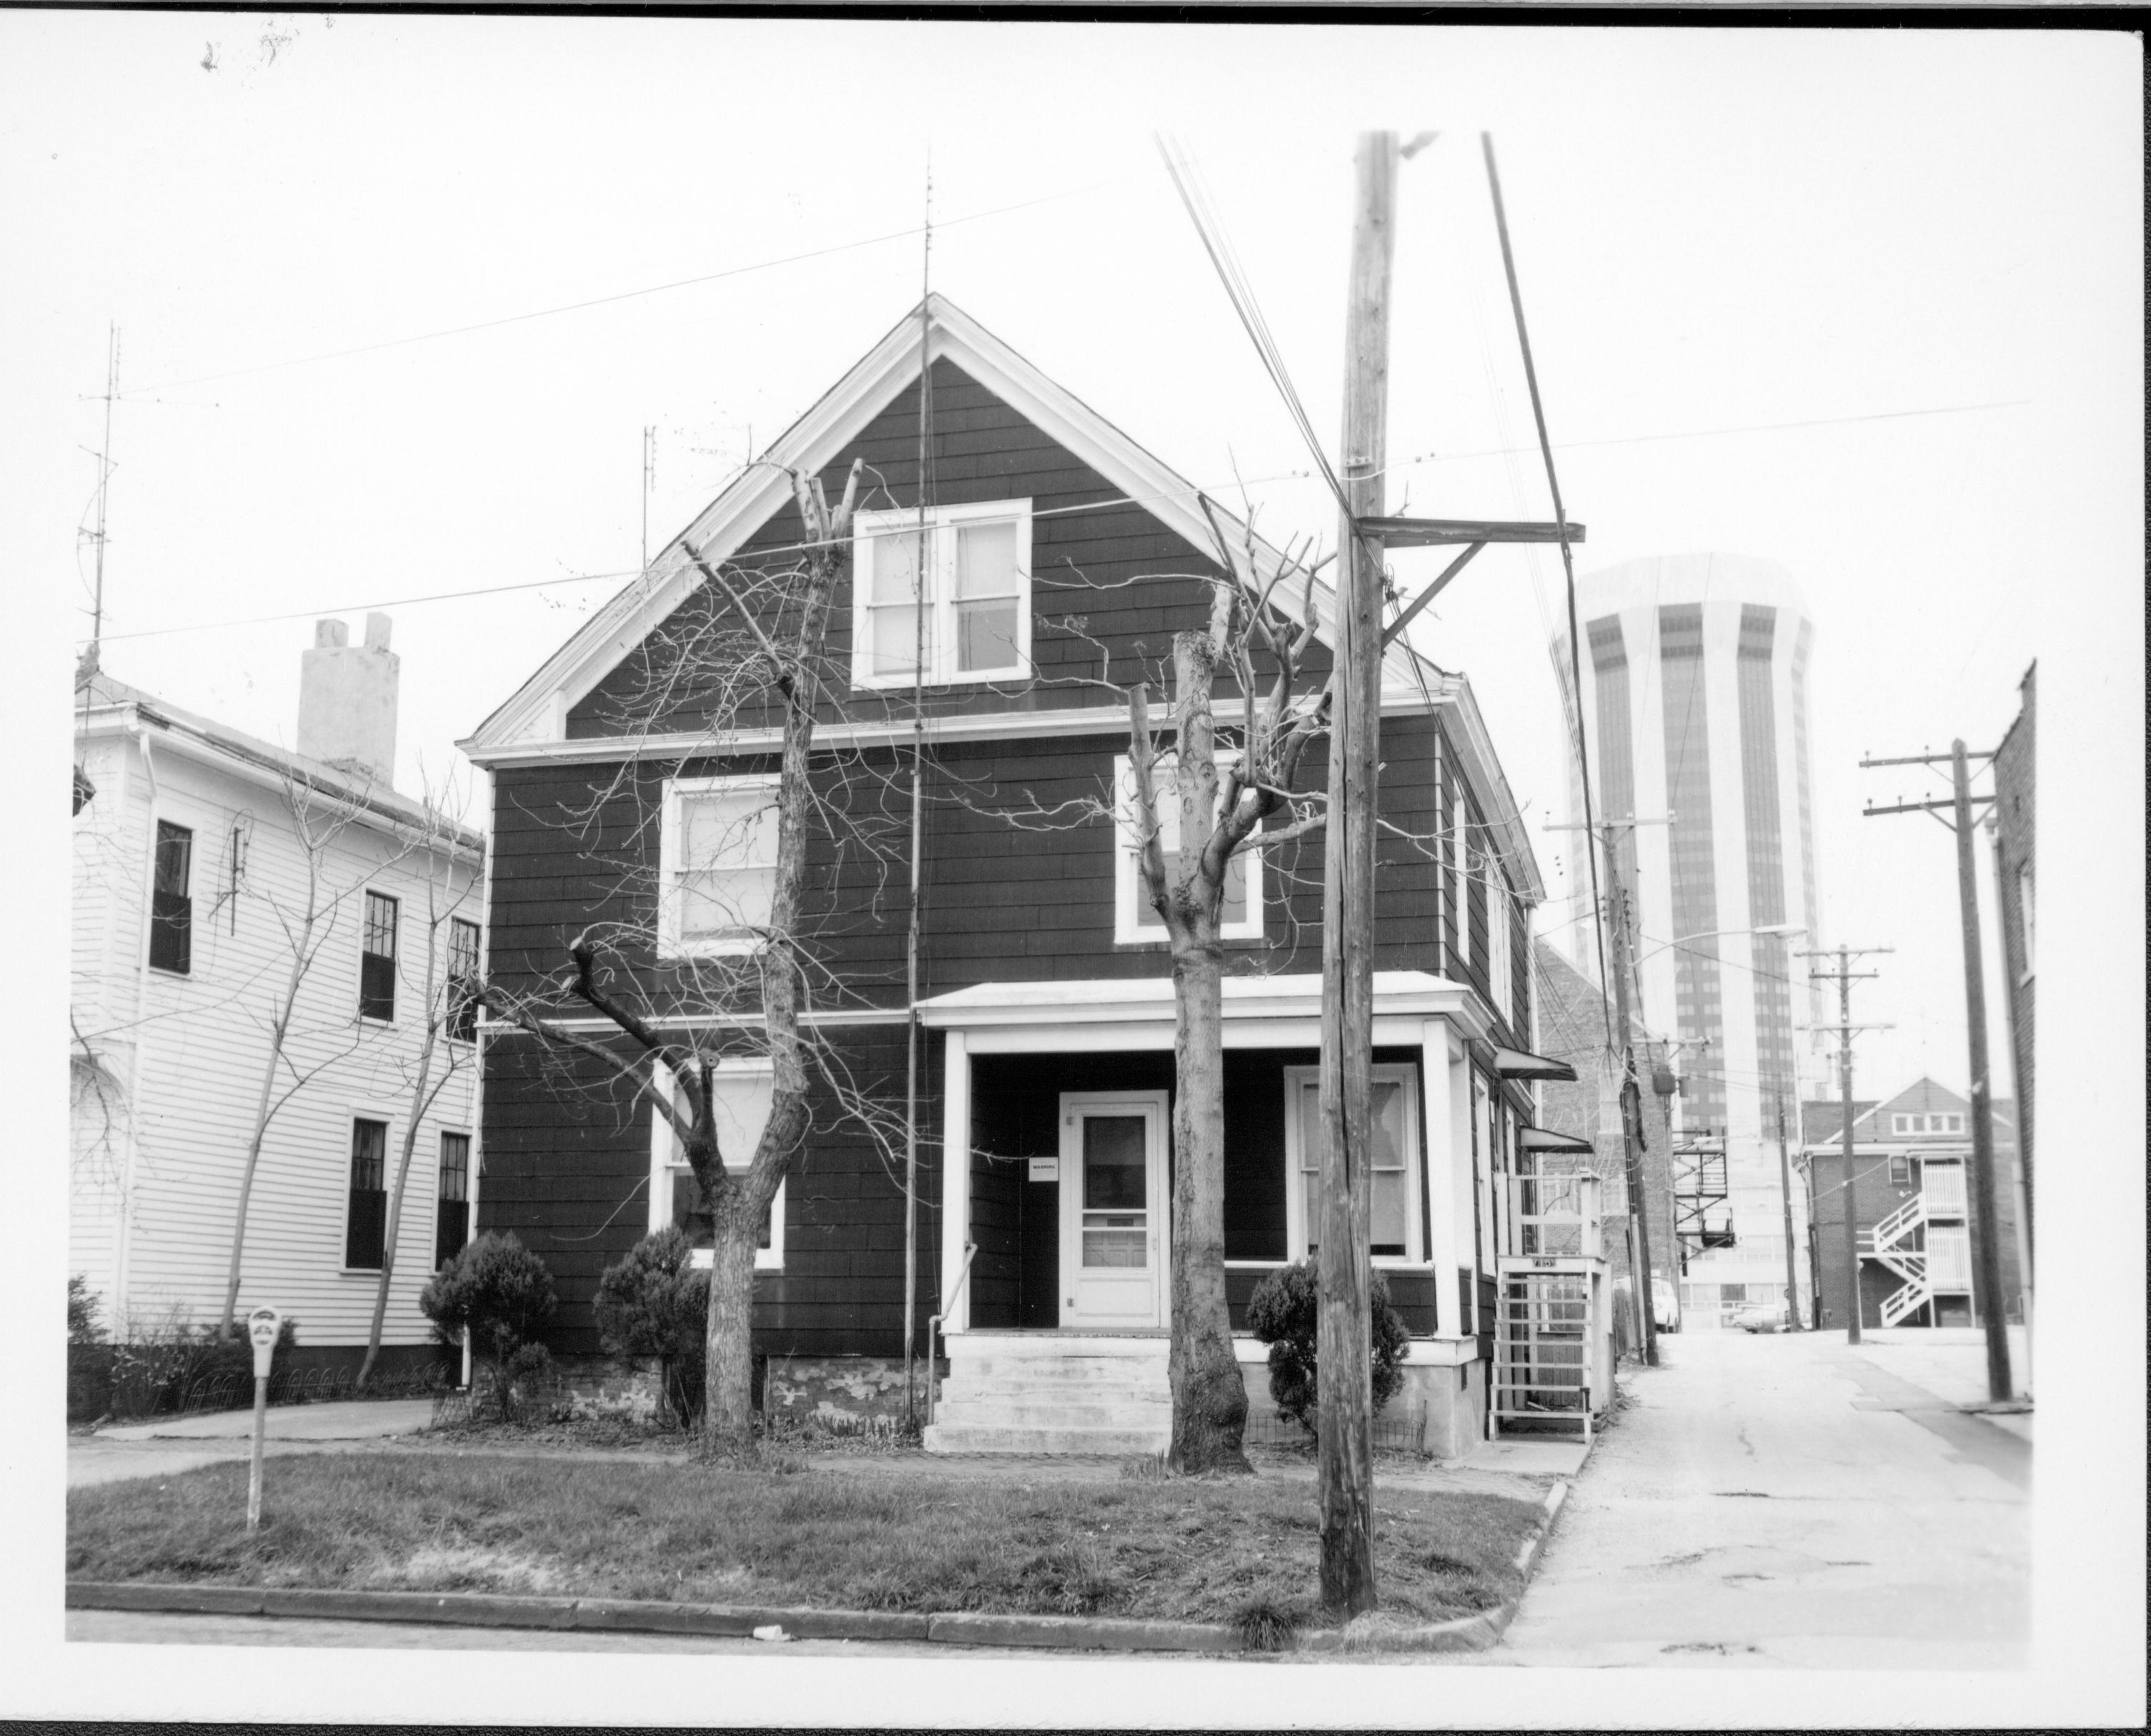 House owned by William Hermes in use as apartments, Block 7, Lot 8, along Jackson Street near alley.  House owned by William Sheeham on left.  Hilton Hotel tower seen in background on right. Back of house w/fire escapes owned by Mills White.  Area is now Visitor Center  Looking North along Jackson Street near alley Hermes, Sheeham, Hilton Hotel, White, Jackson Street, Visitor Center